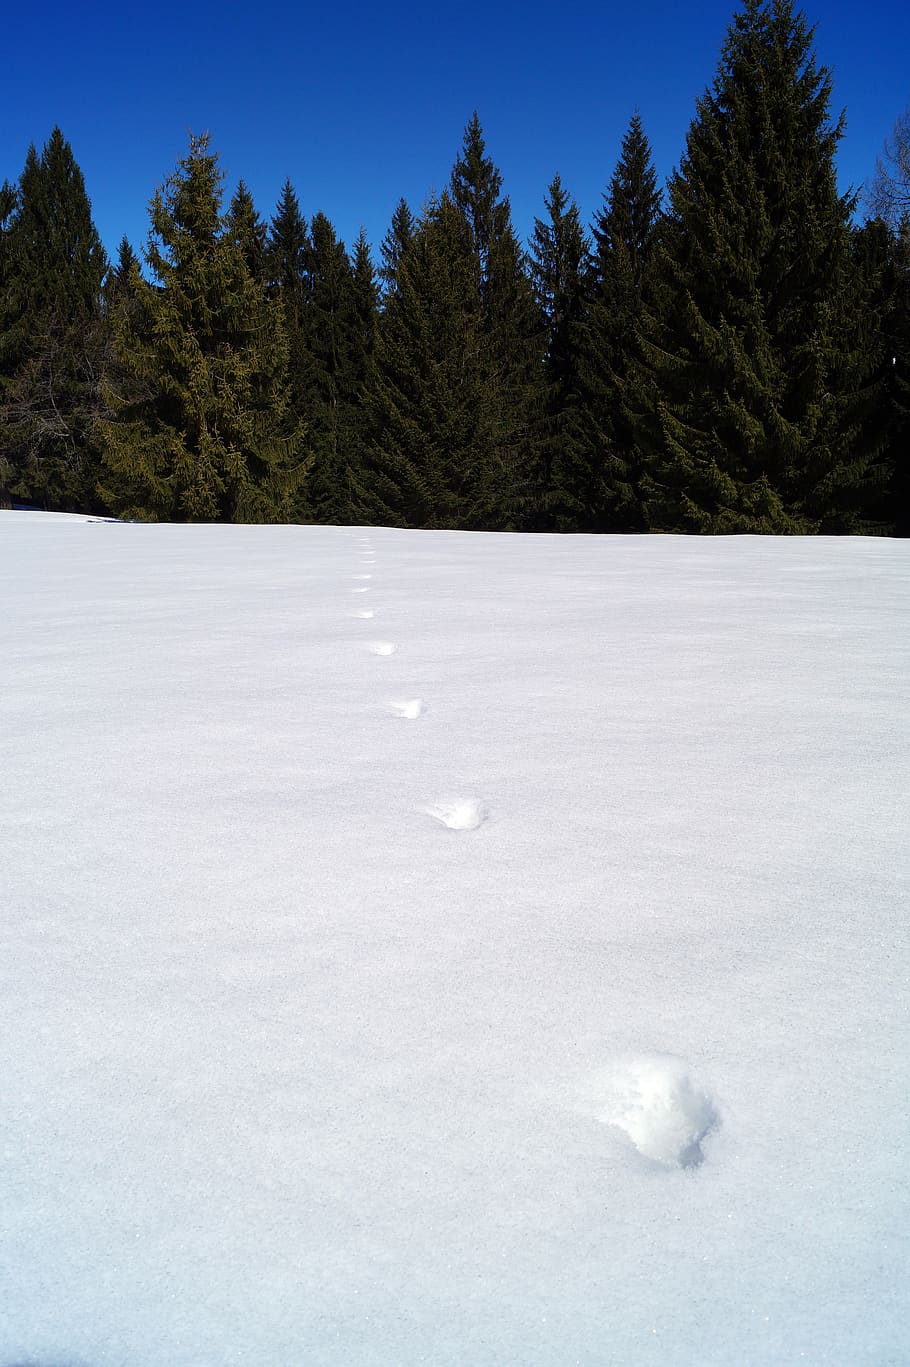 footsteps, snow, steps, individual steps in the snow, forest, tree, plant, cold temperature, nature, winter